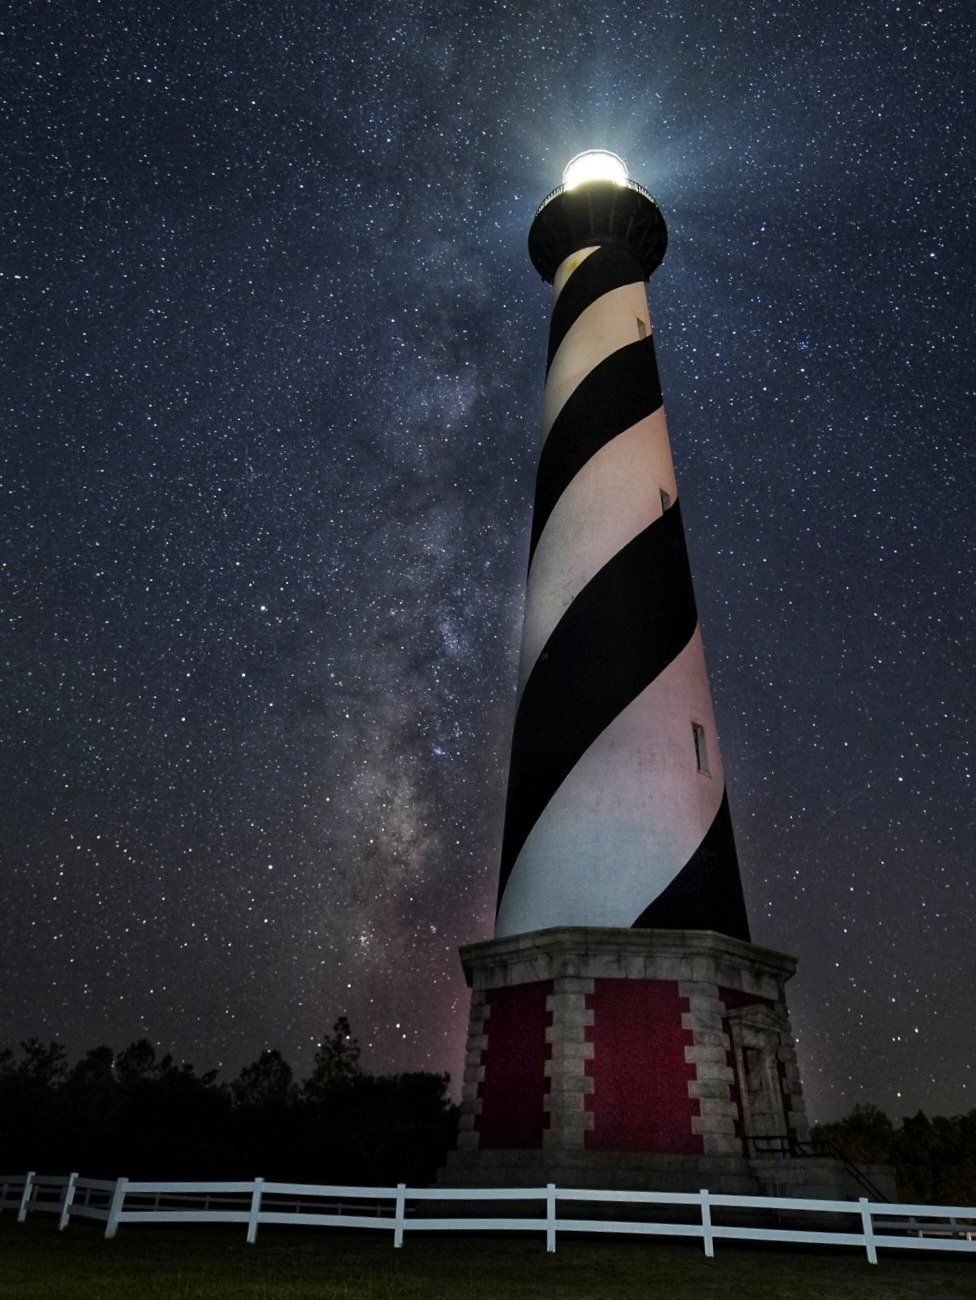 Cape Hatteras Light house on the outer banks of North Carolina